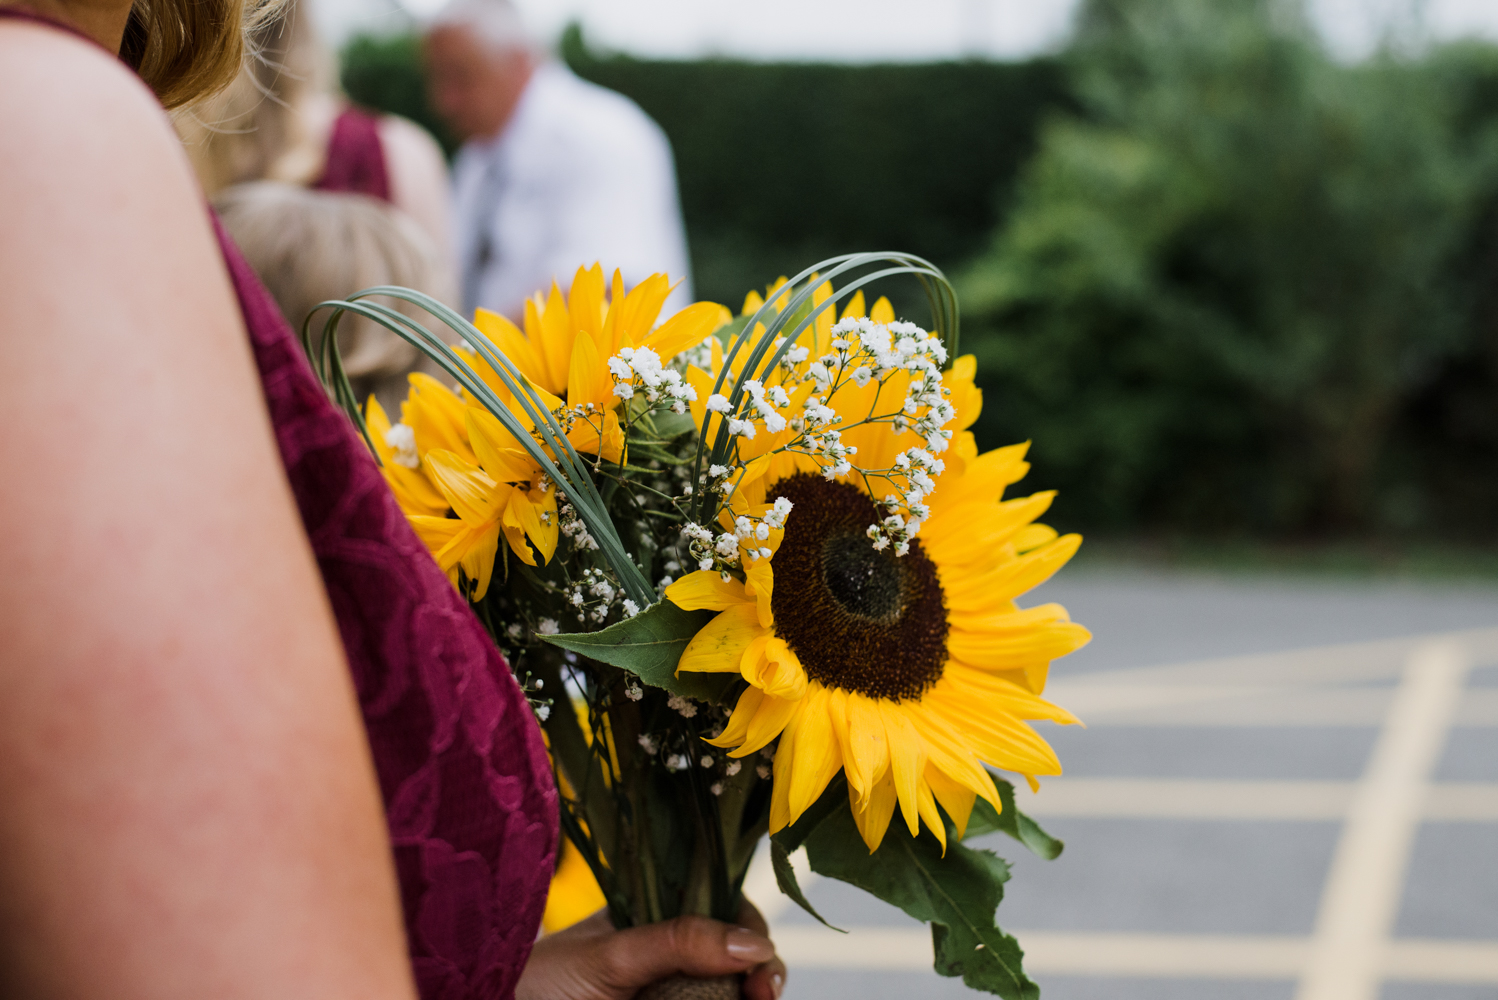 Sunflowers everywhere the bridesmaids bouquet